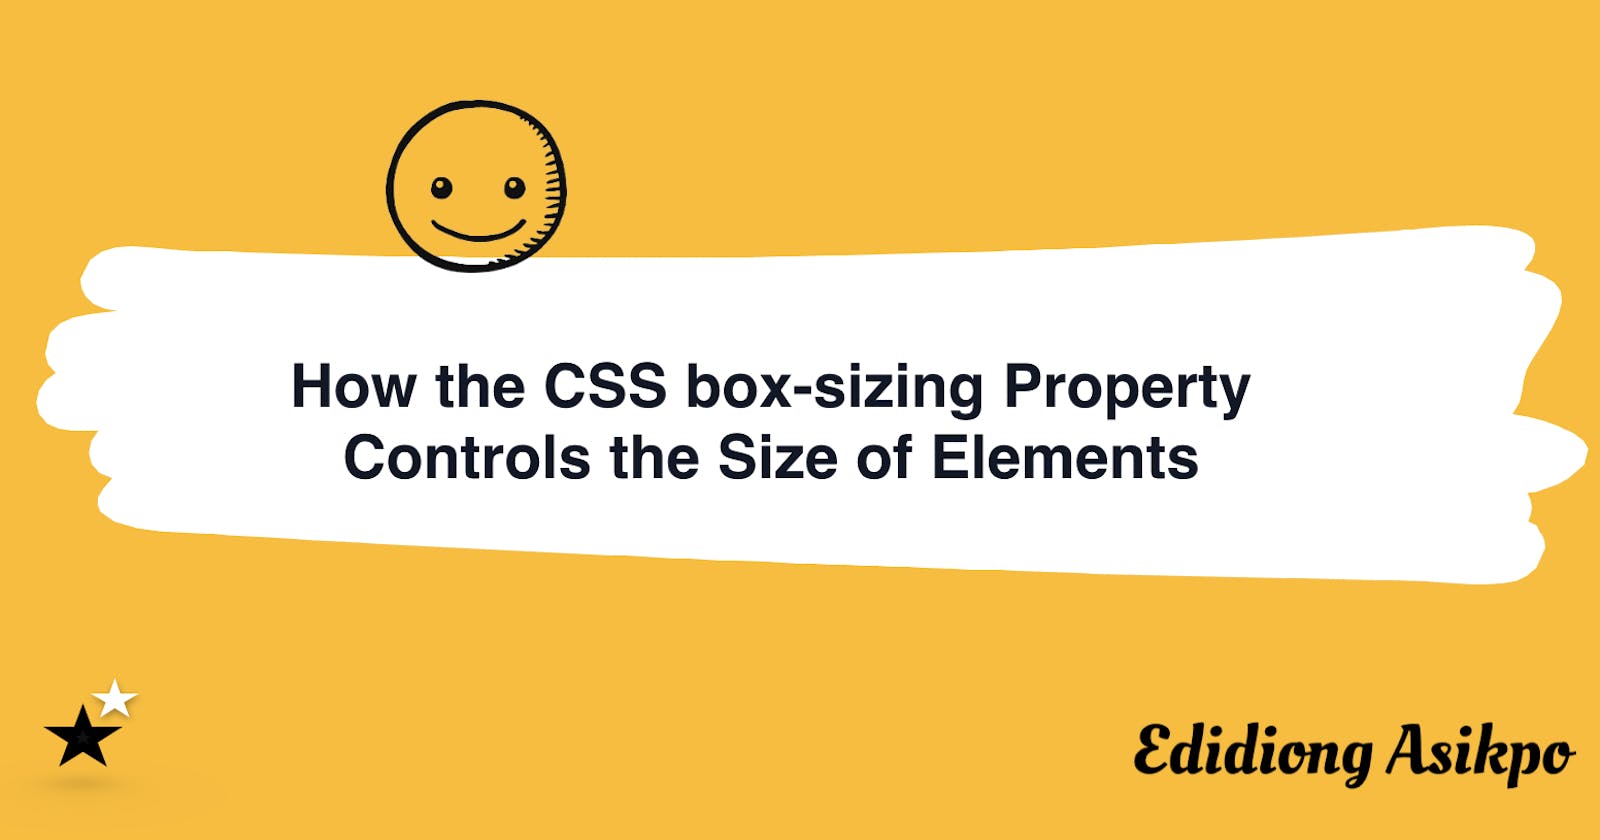 How the CSS box-sizing Property Controls the Size of Elements